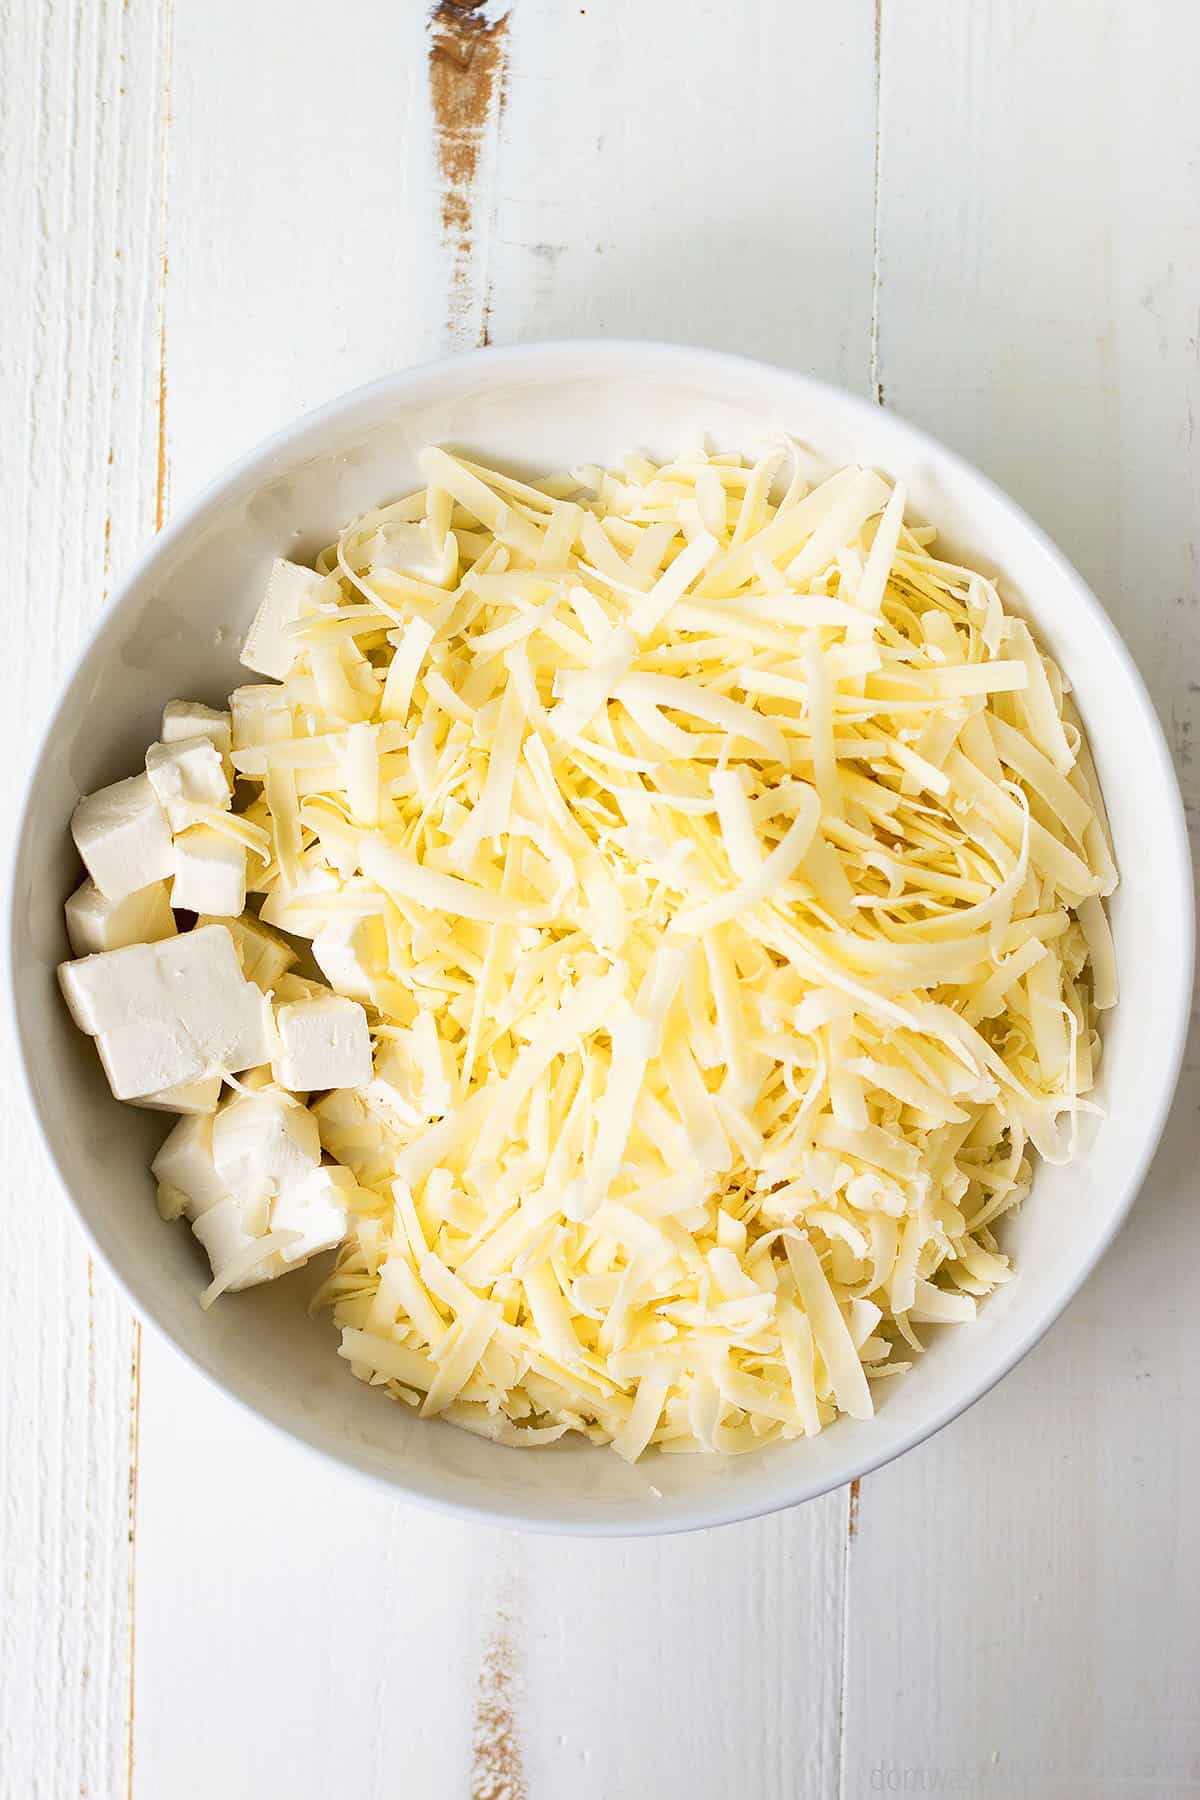 A white bowl with two different cheeses, cream cheese and shredded cheddar cheese.